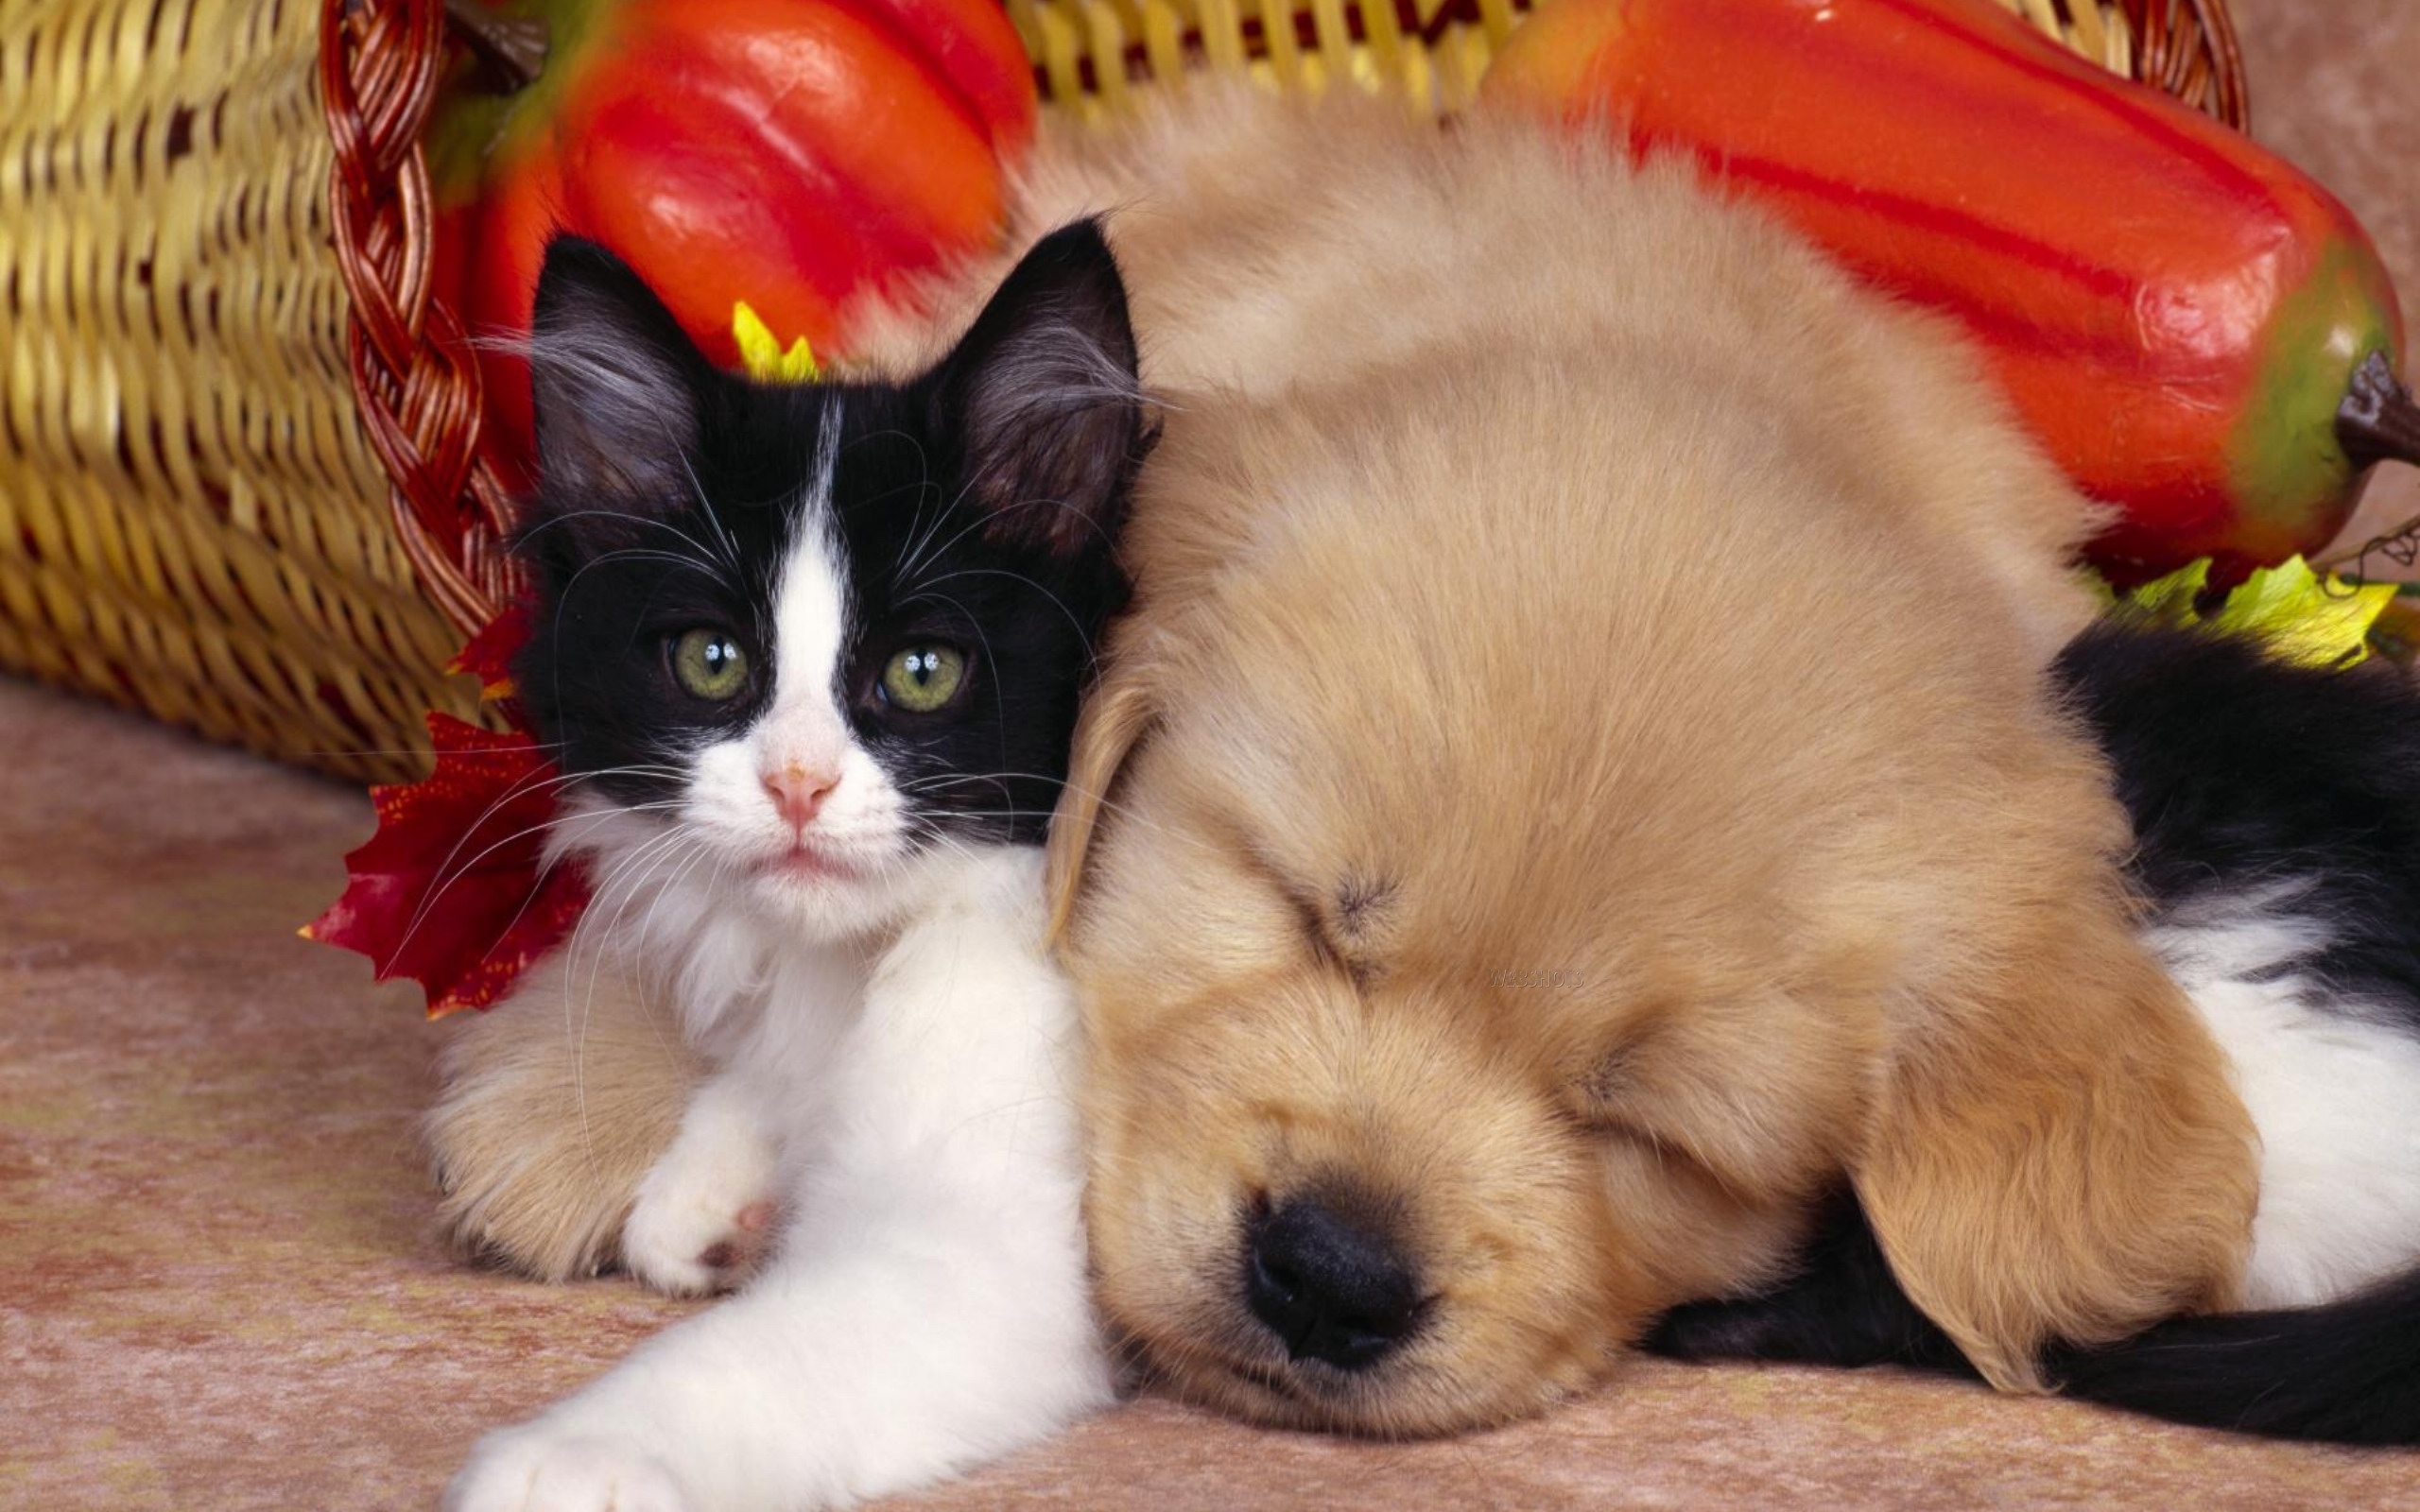 Link Of Cute Cat And Dog